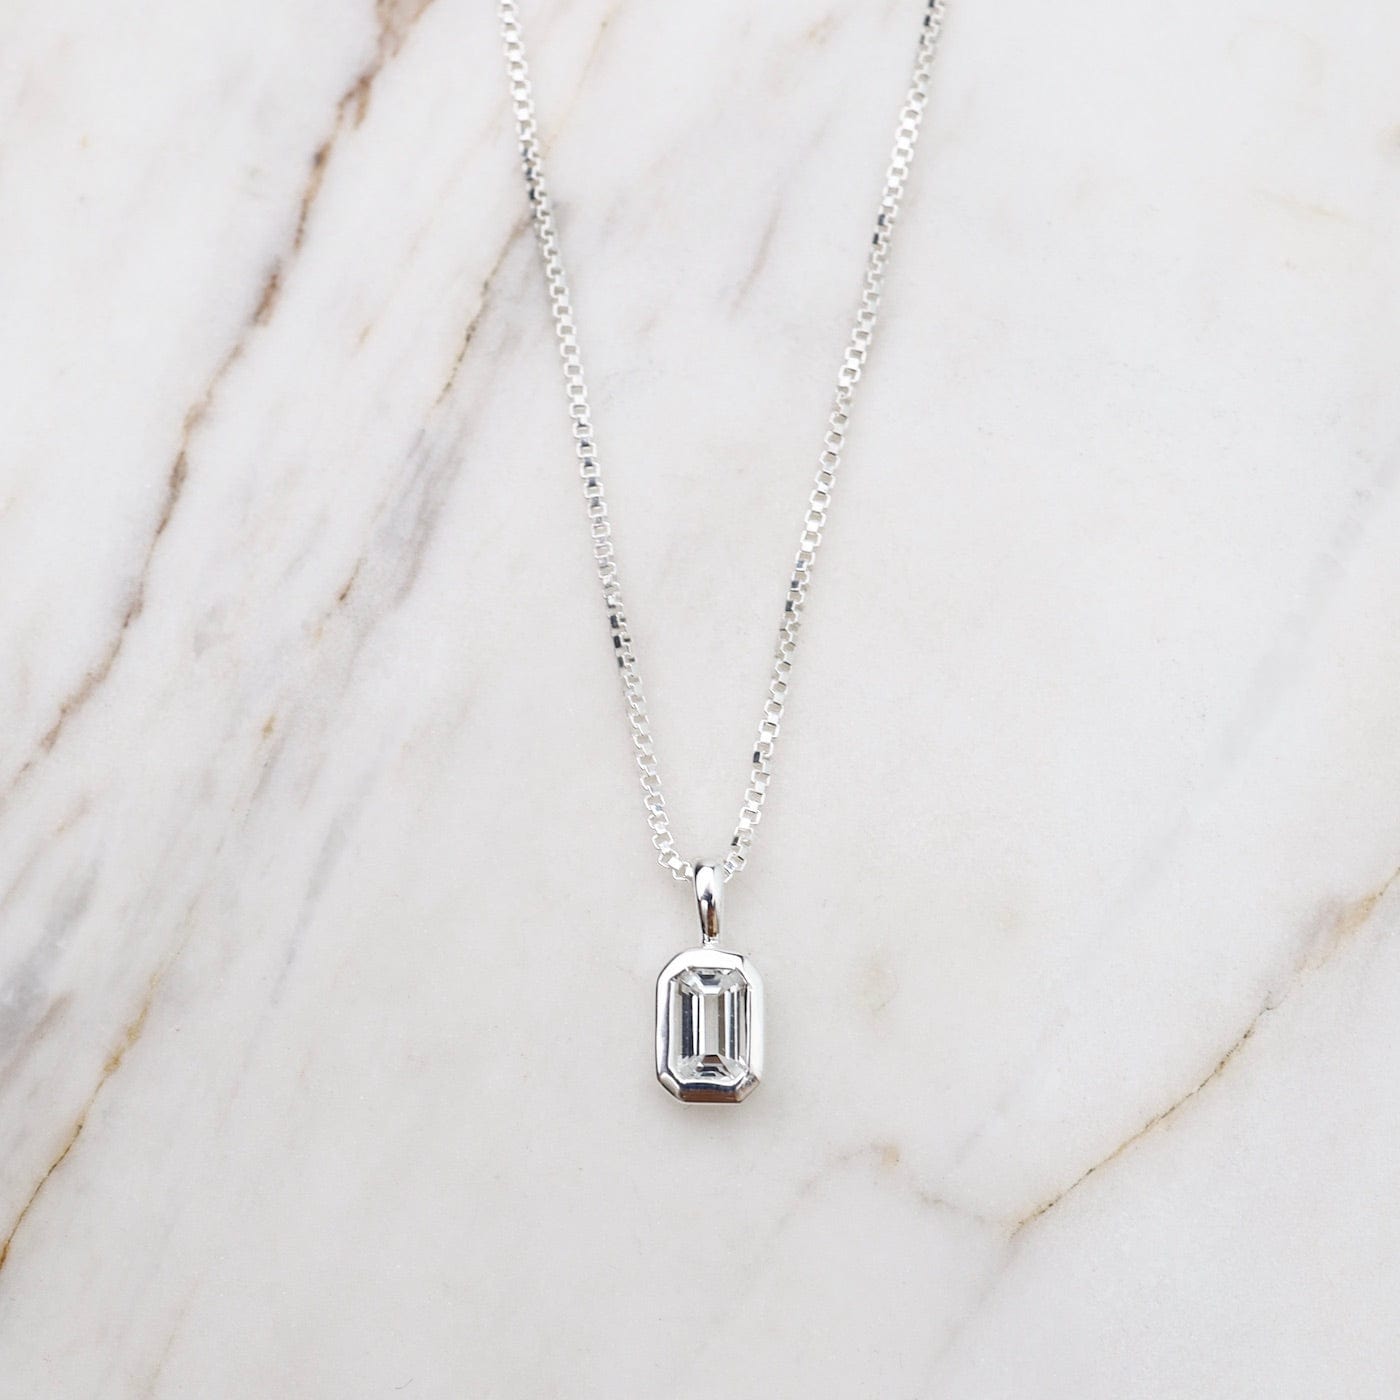 NKL White Topaz Vertical Octagon Necklace - Sterling Silver